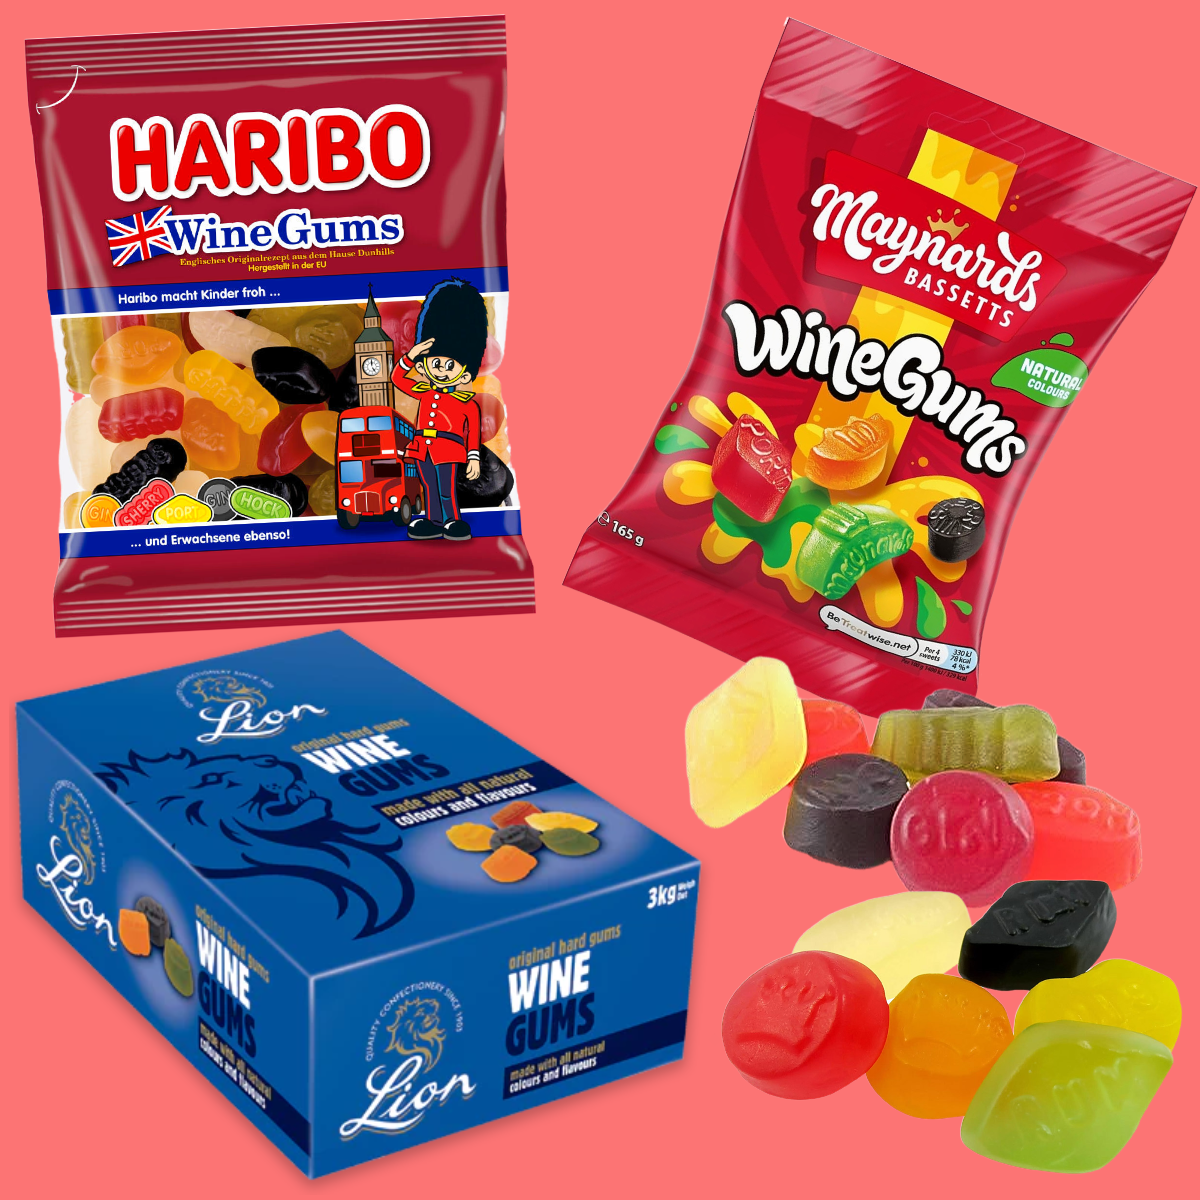 An assortment of Wine Gum brands with a pink background